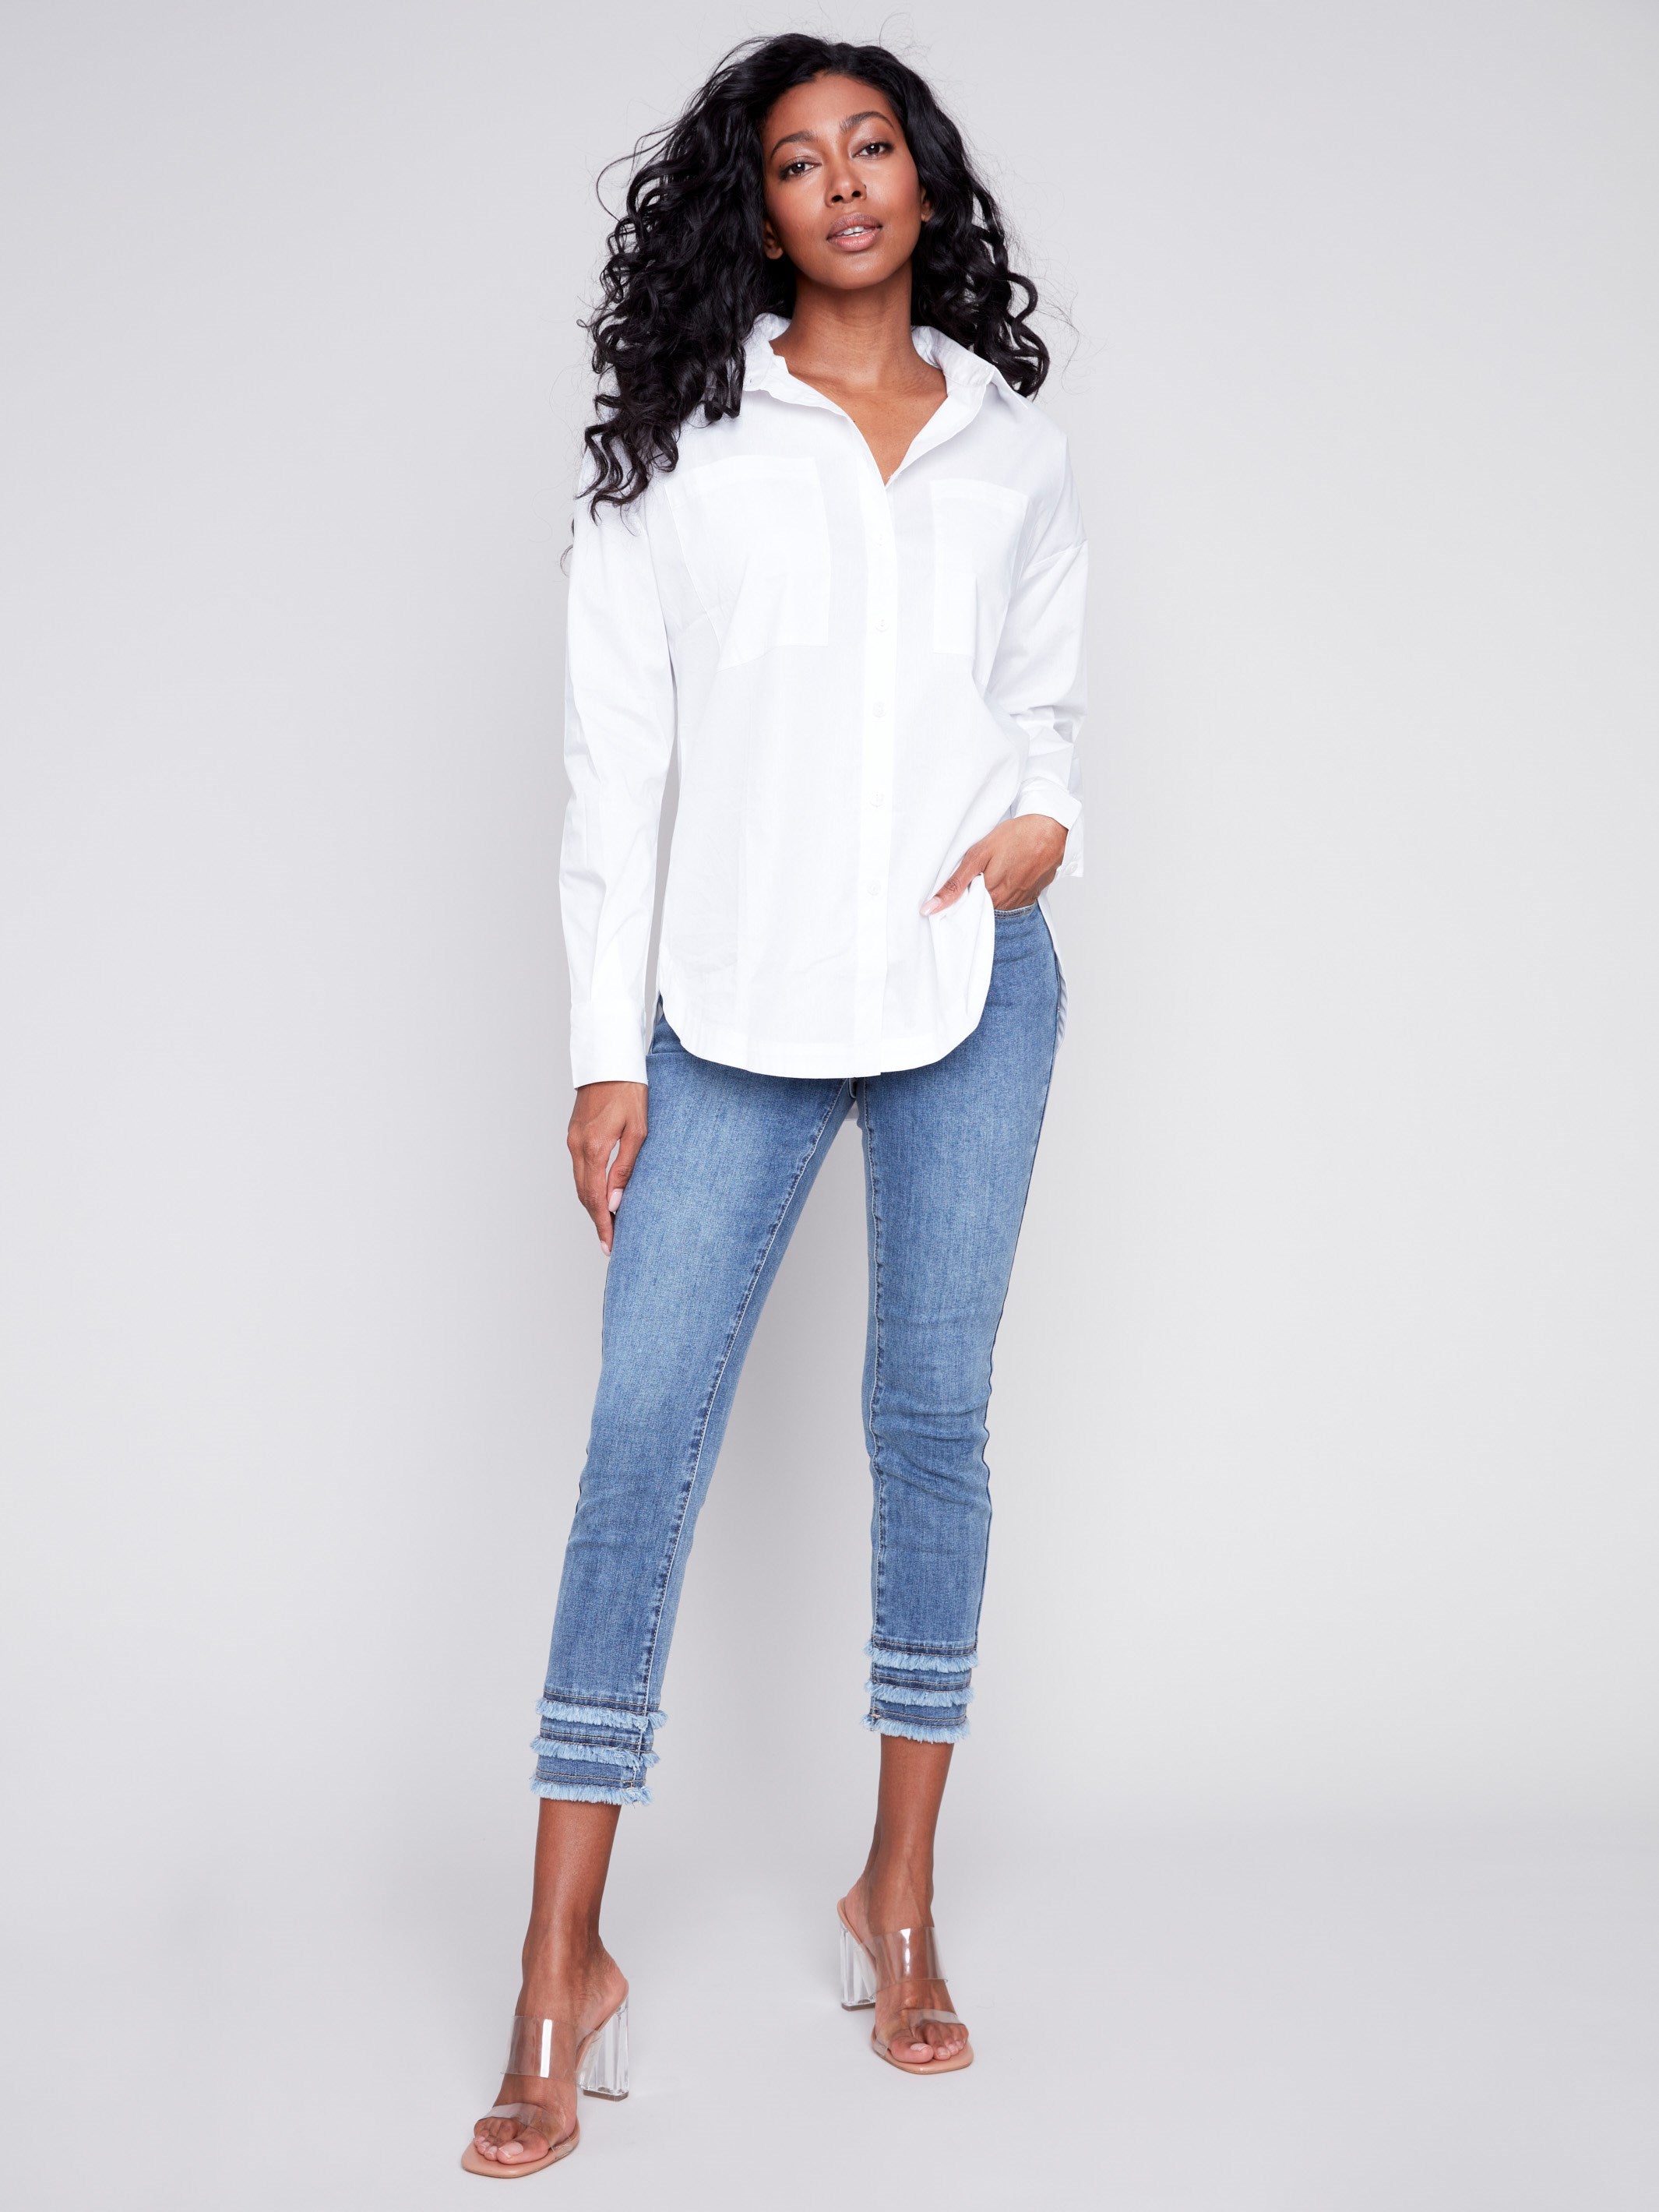 Loose Poplin Shirt - White - Charlie B Collection Canada - Image 3